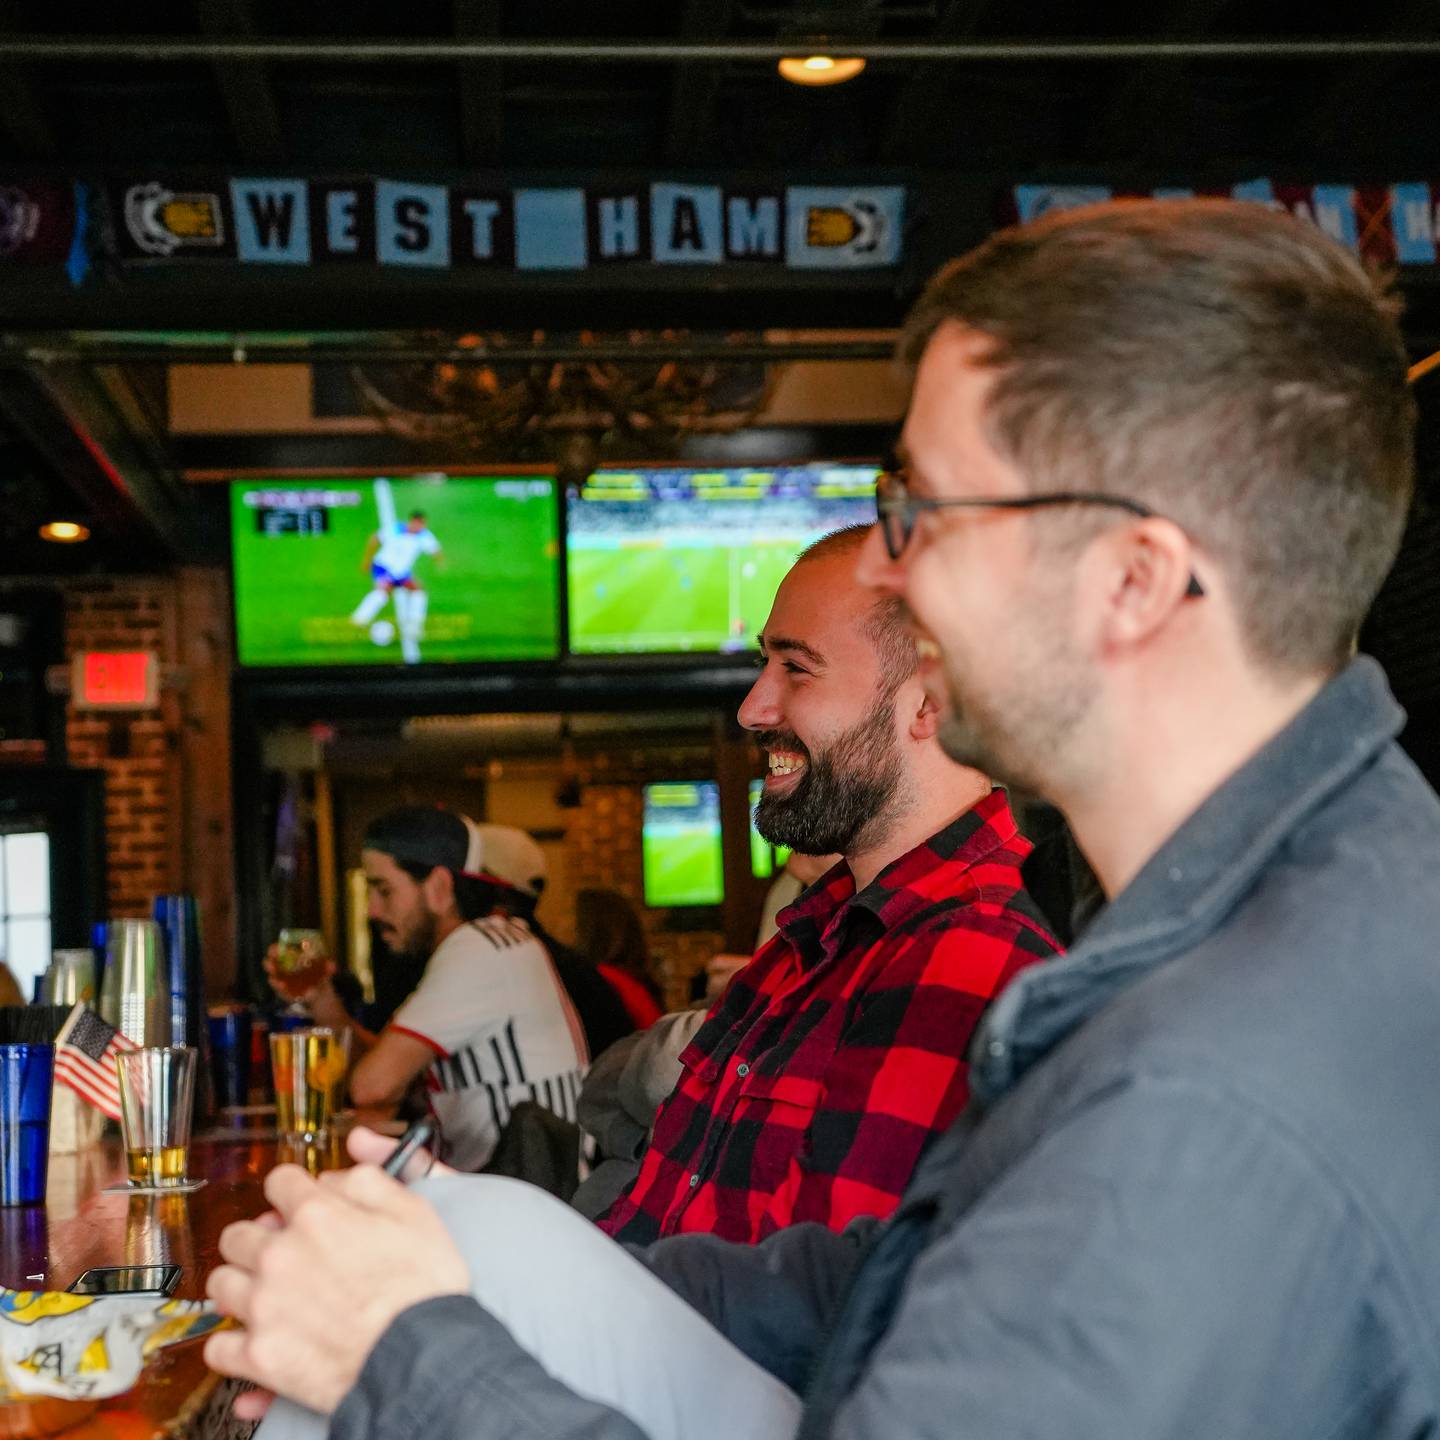 Brothers, Joey Fluehr, 24, (left) and Ryan Fluehr, 29, share some good laughs while watching the USA vs. Iran World Cup match at Abbey Burger in Little Italy, Baltimore, Md., on November 29, 2022.